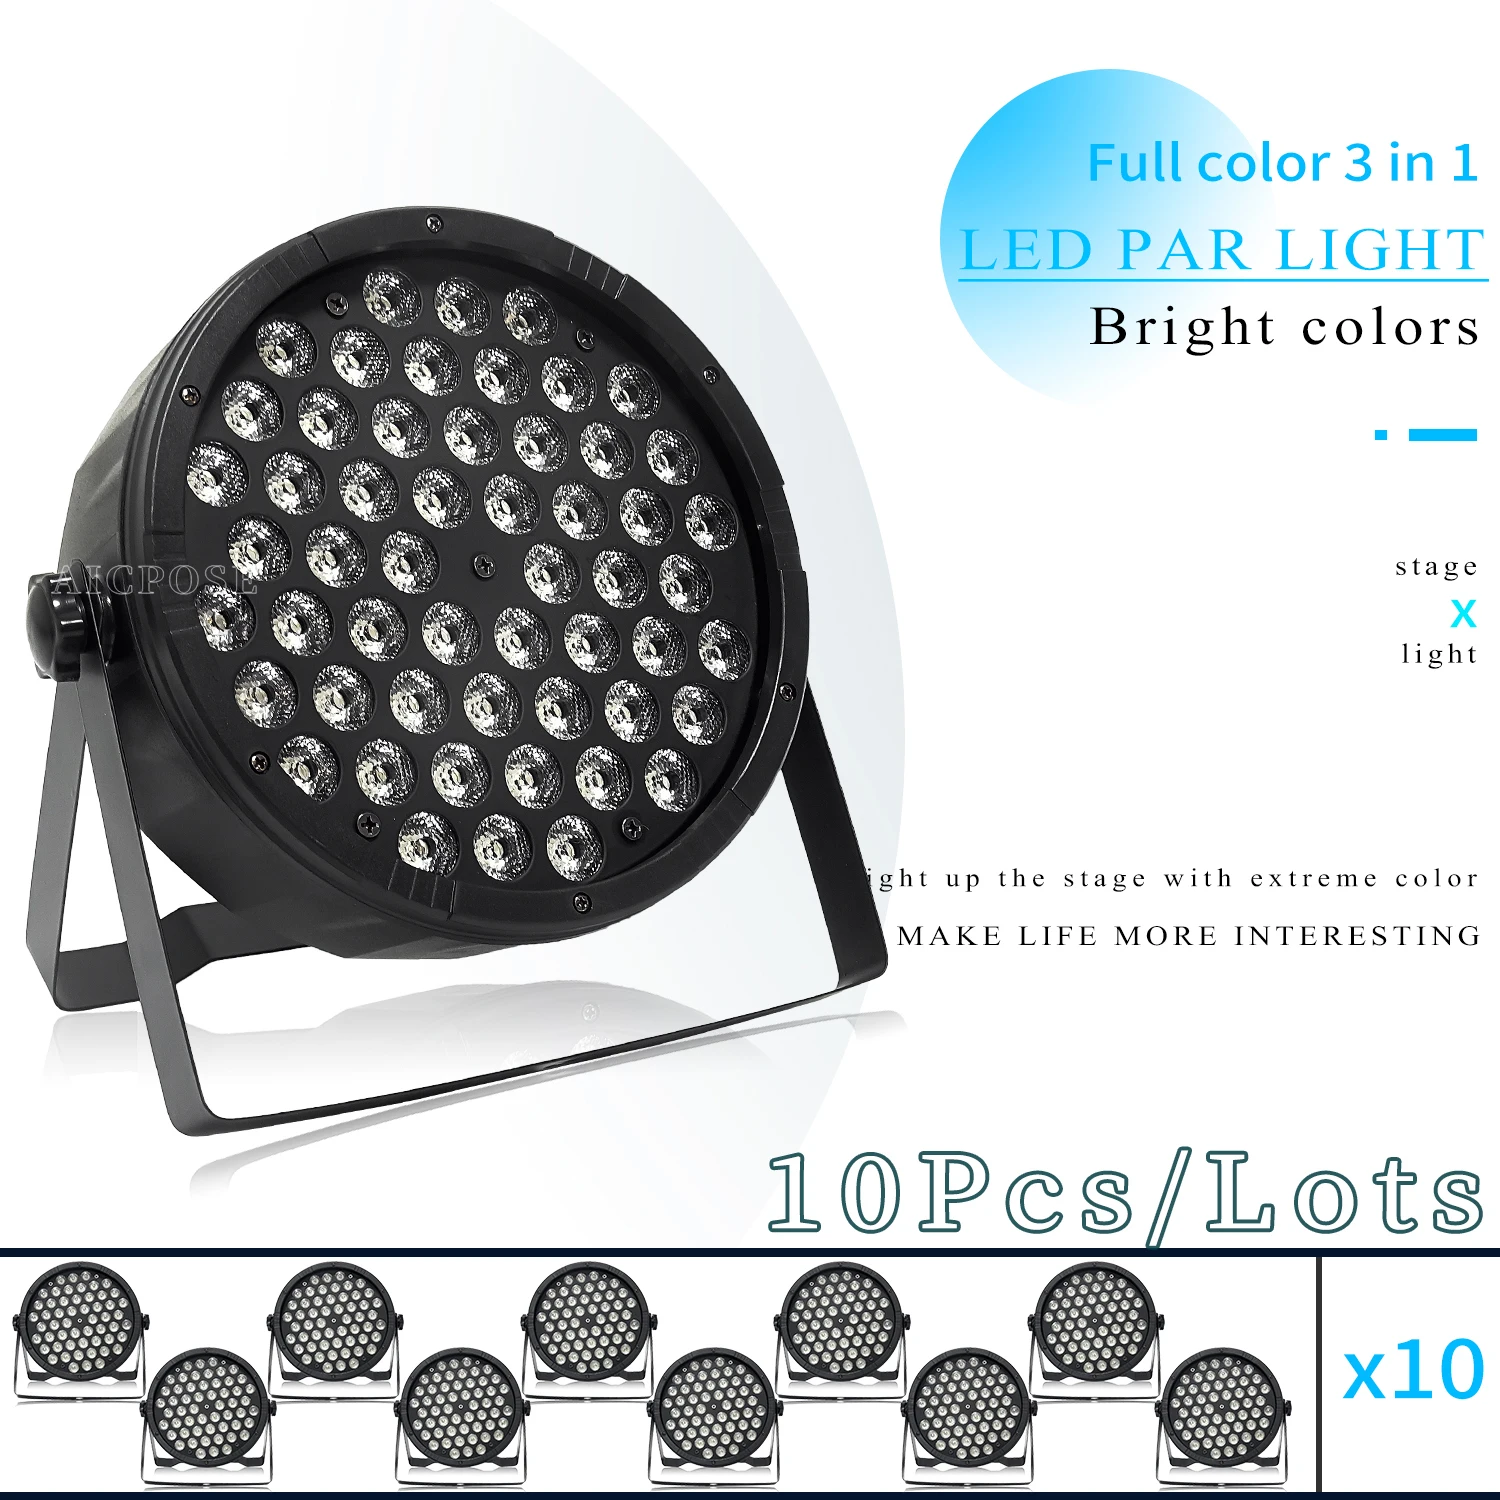 

10Pcs/lots 54x3W RGB 3in1 Led Par Lights 54*3w Lights Disco Wedding Party Wall Wash Light DMX 512 Controller Effect Stage Light